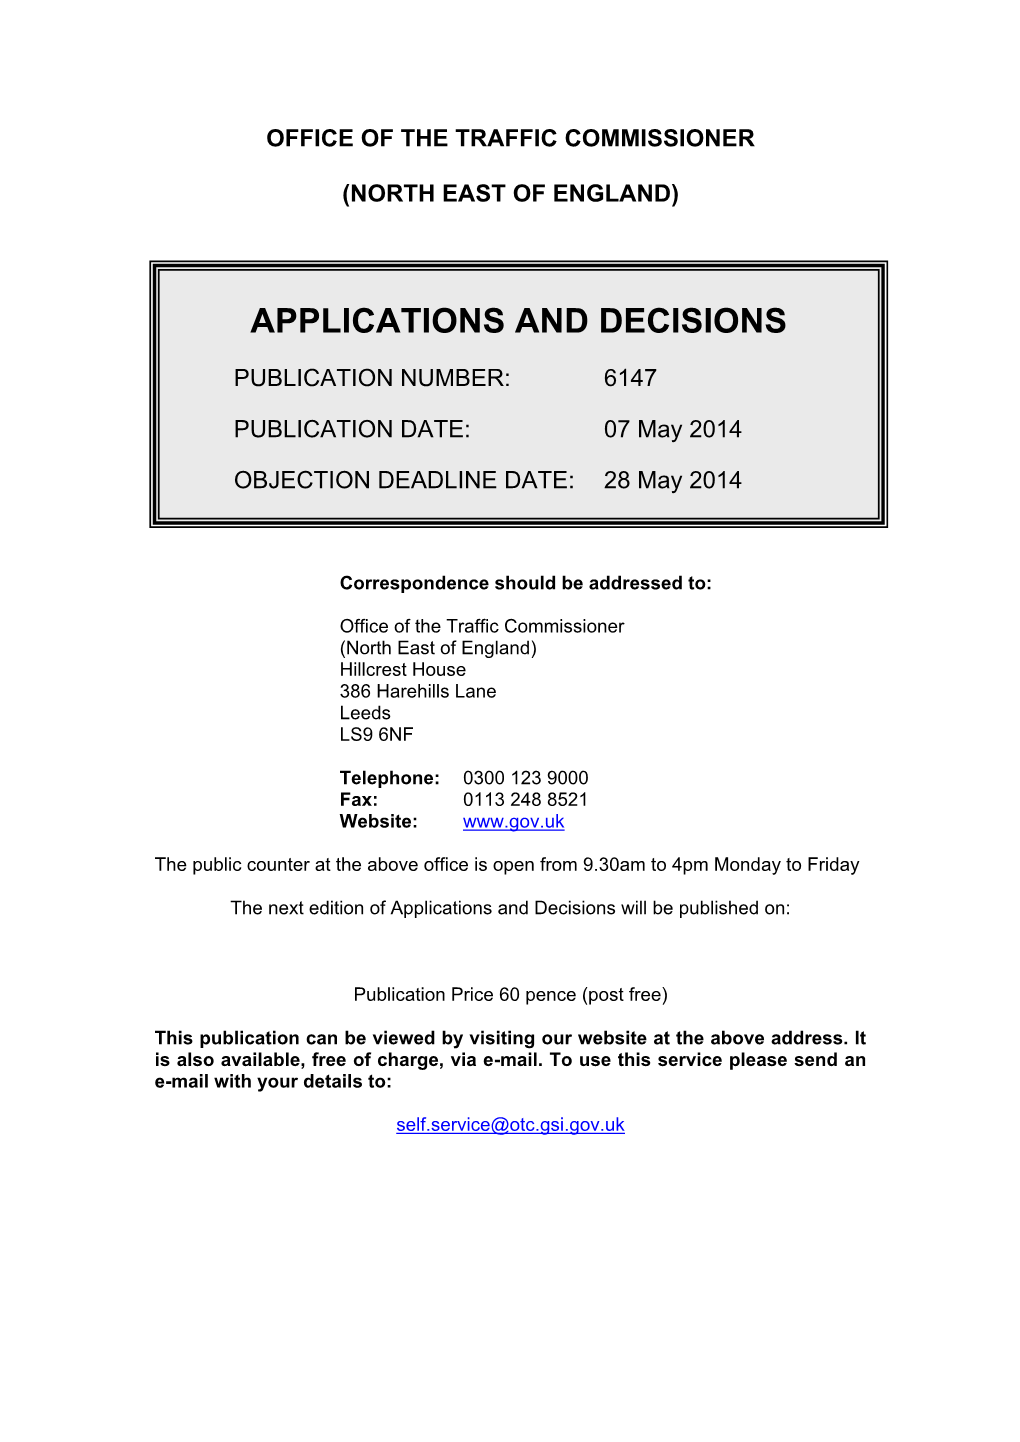 Applications and Decisions: North East of England: 7 May 2014